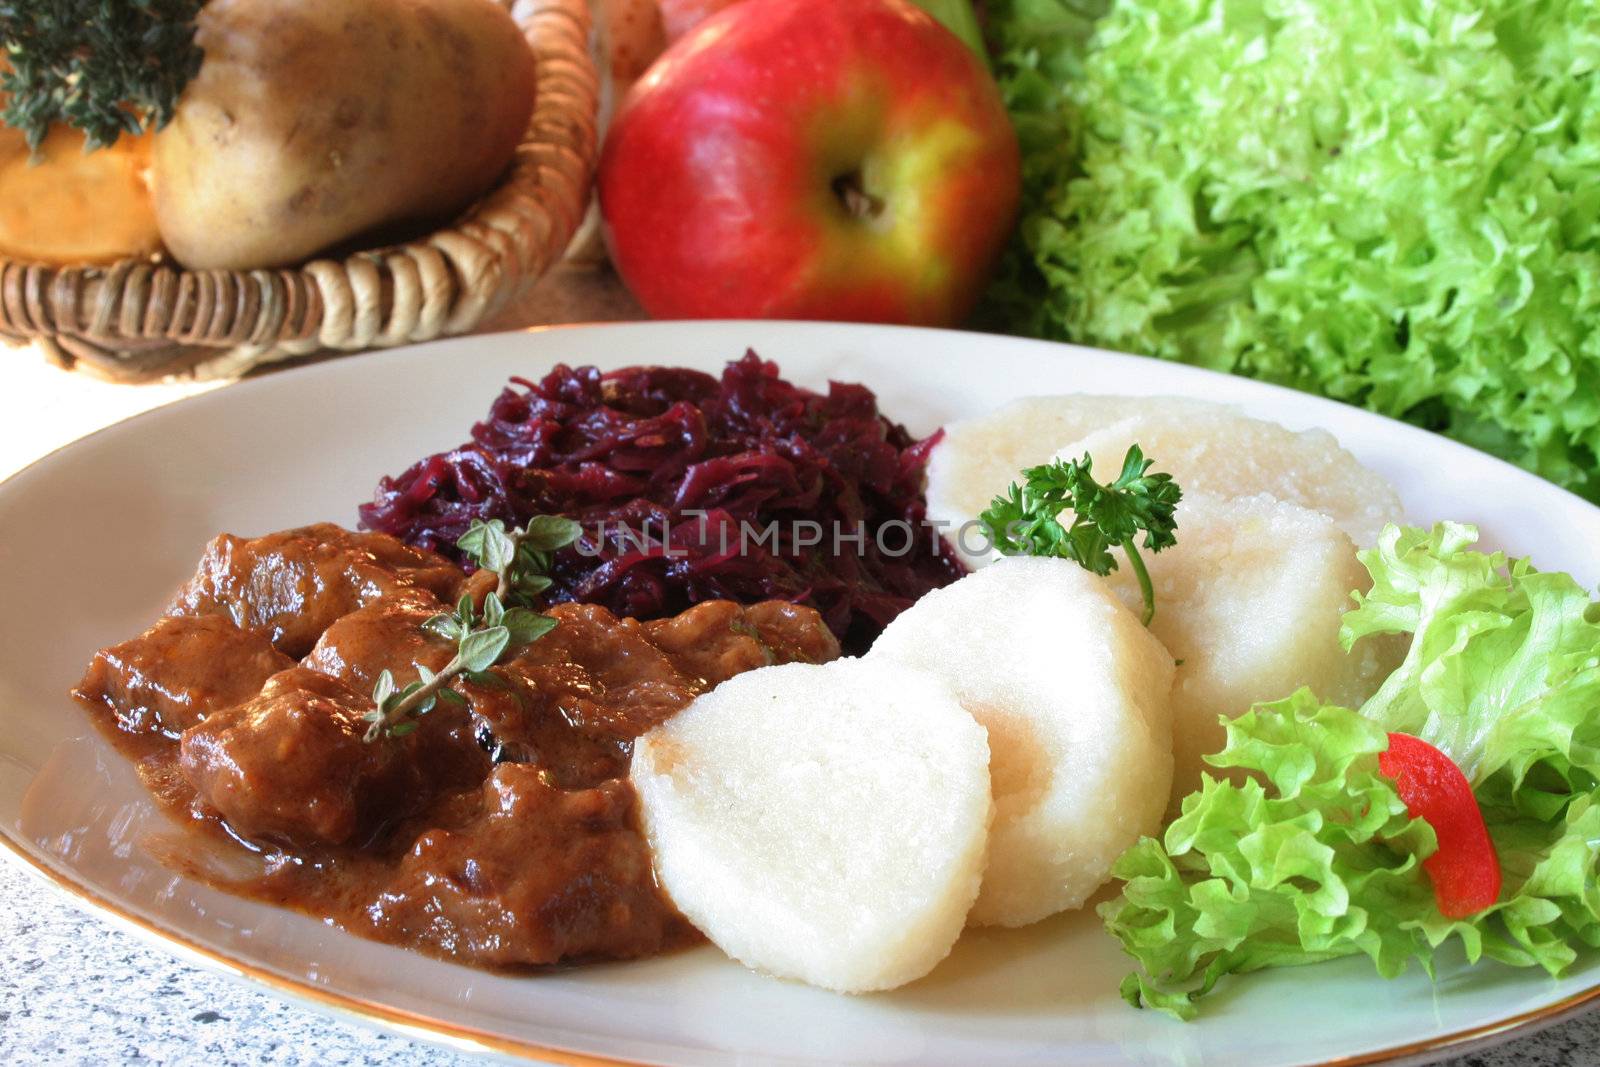 Game Stew by silencefoto